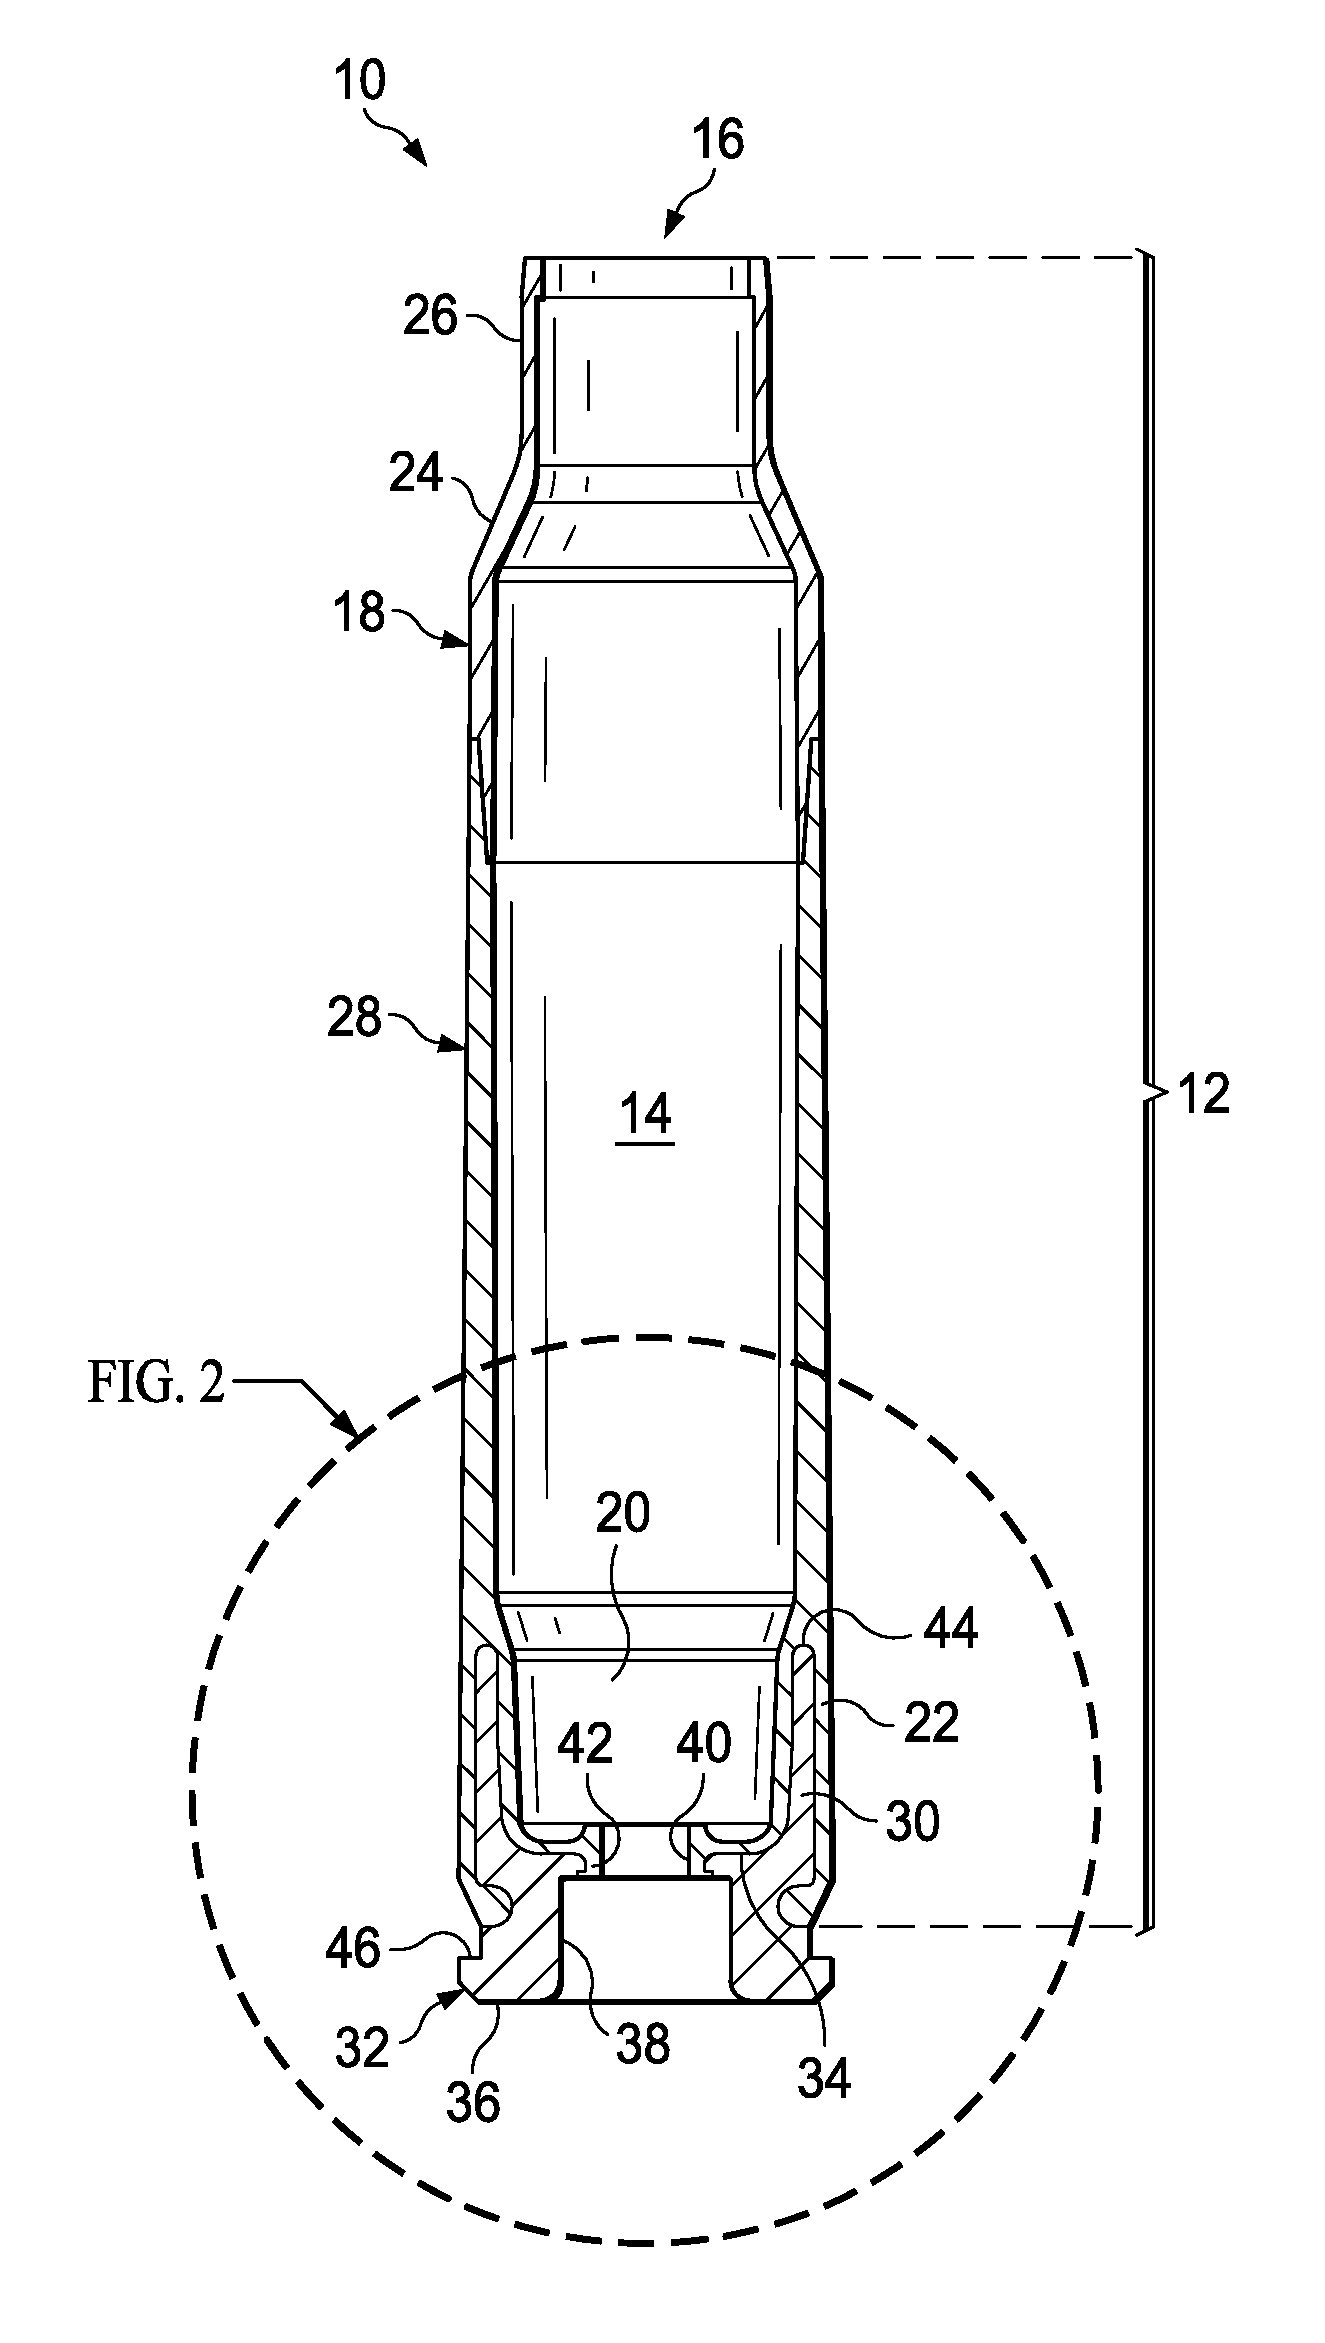 Method of making a polymer ammunition cartridge having a wicking texturing